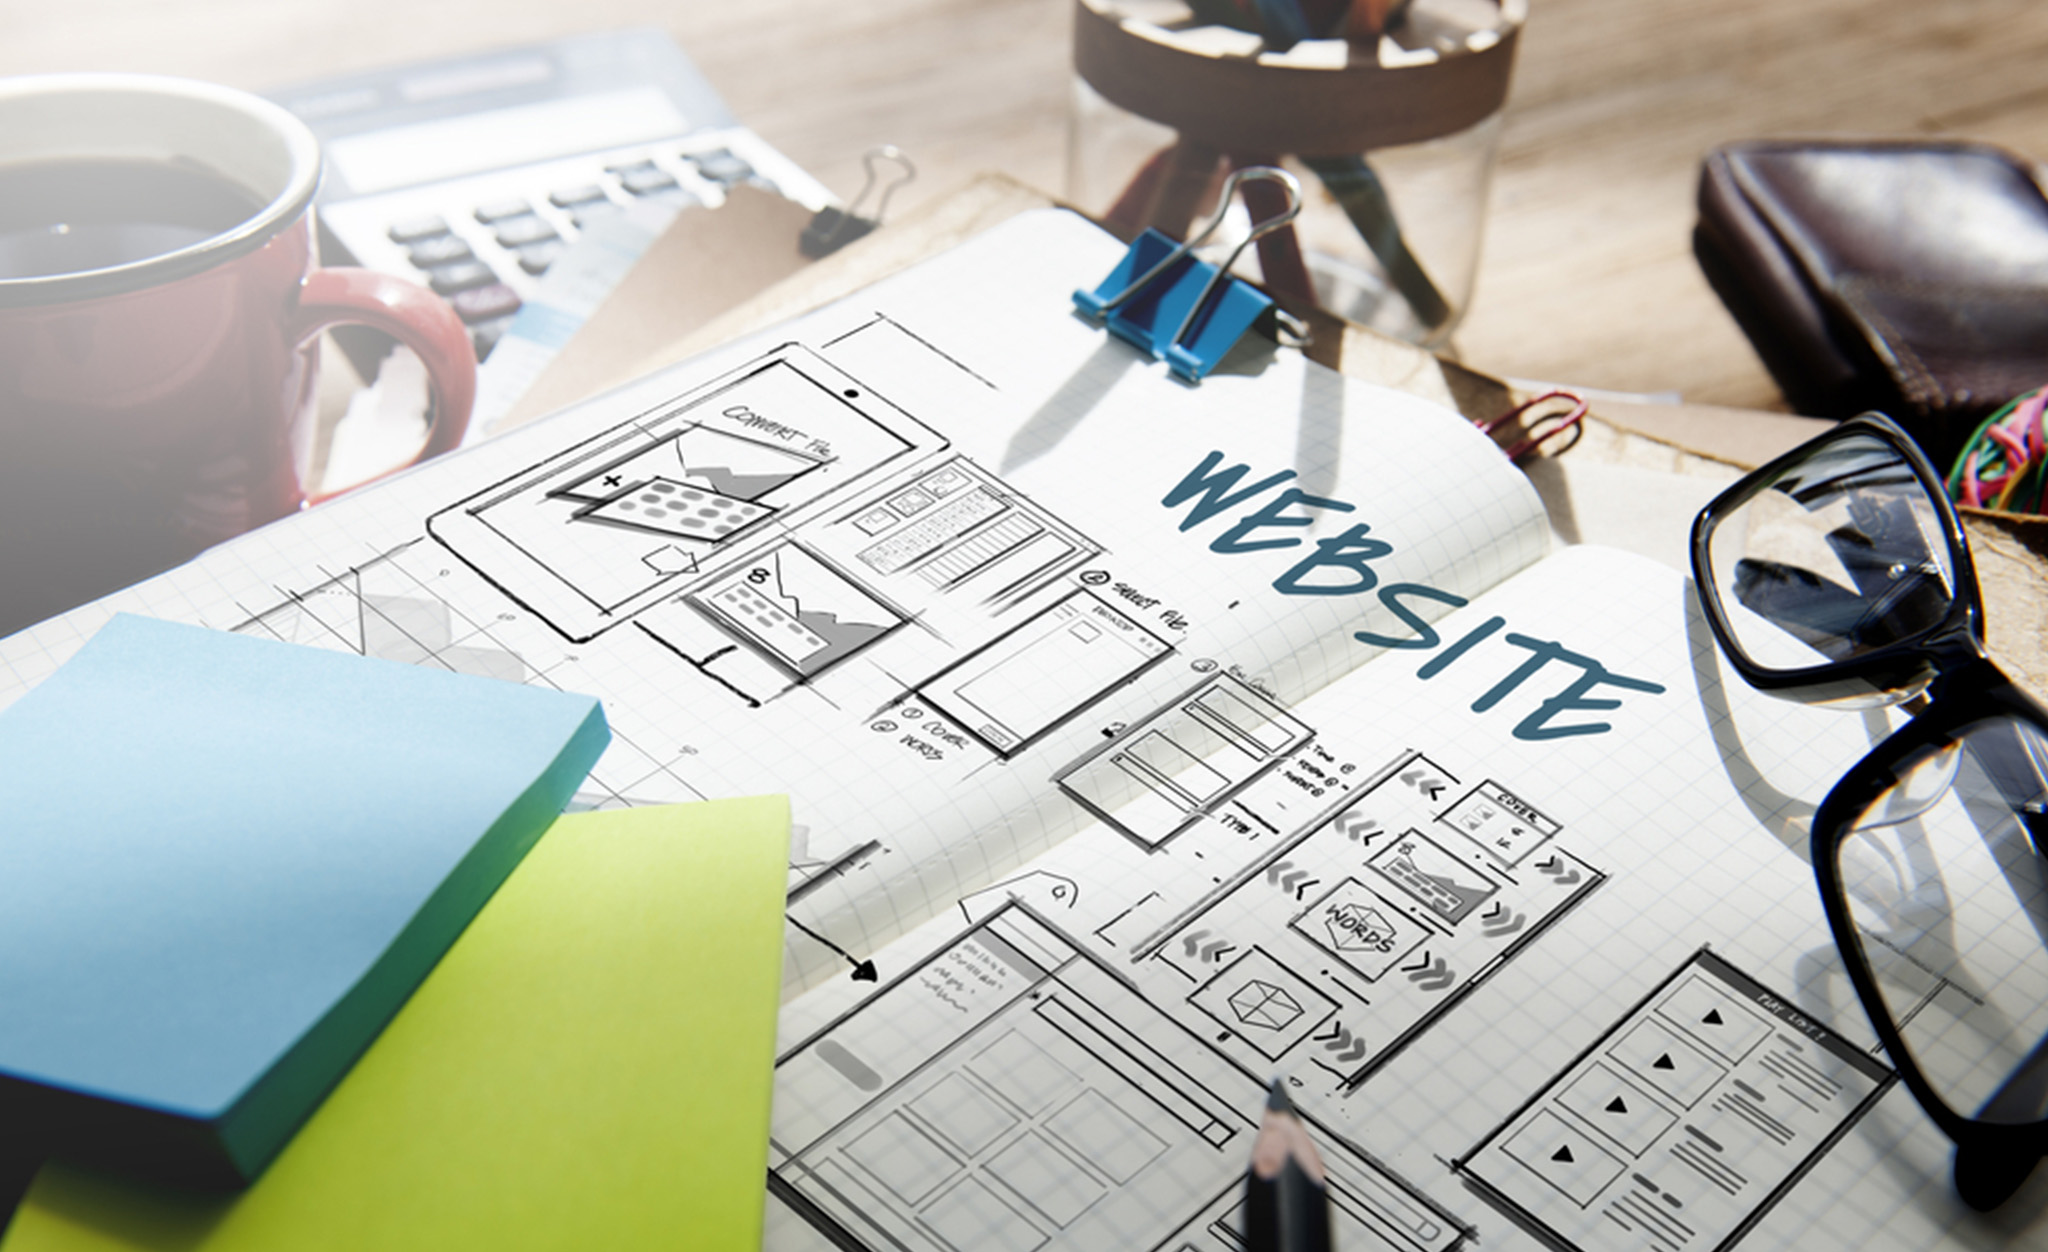 Web Design Process In 7 Easy Steps